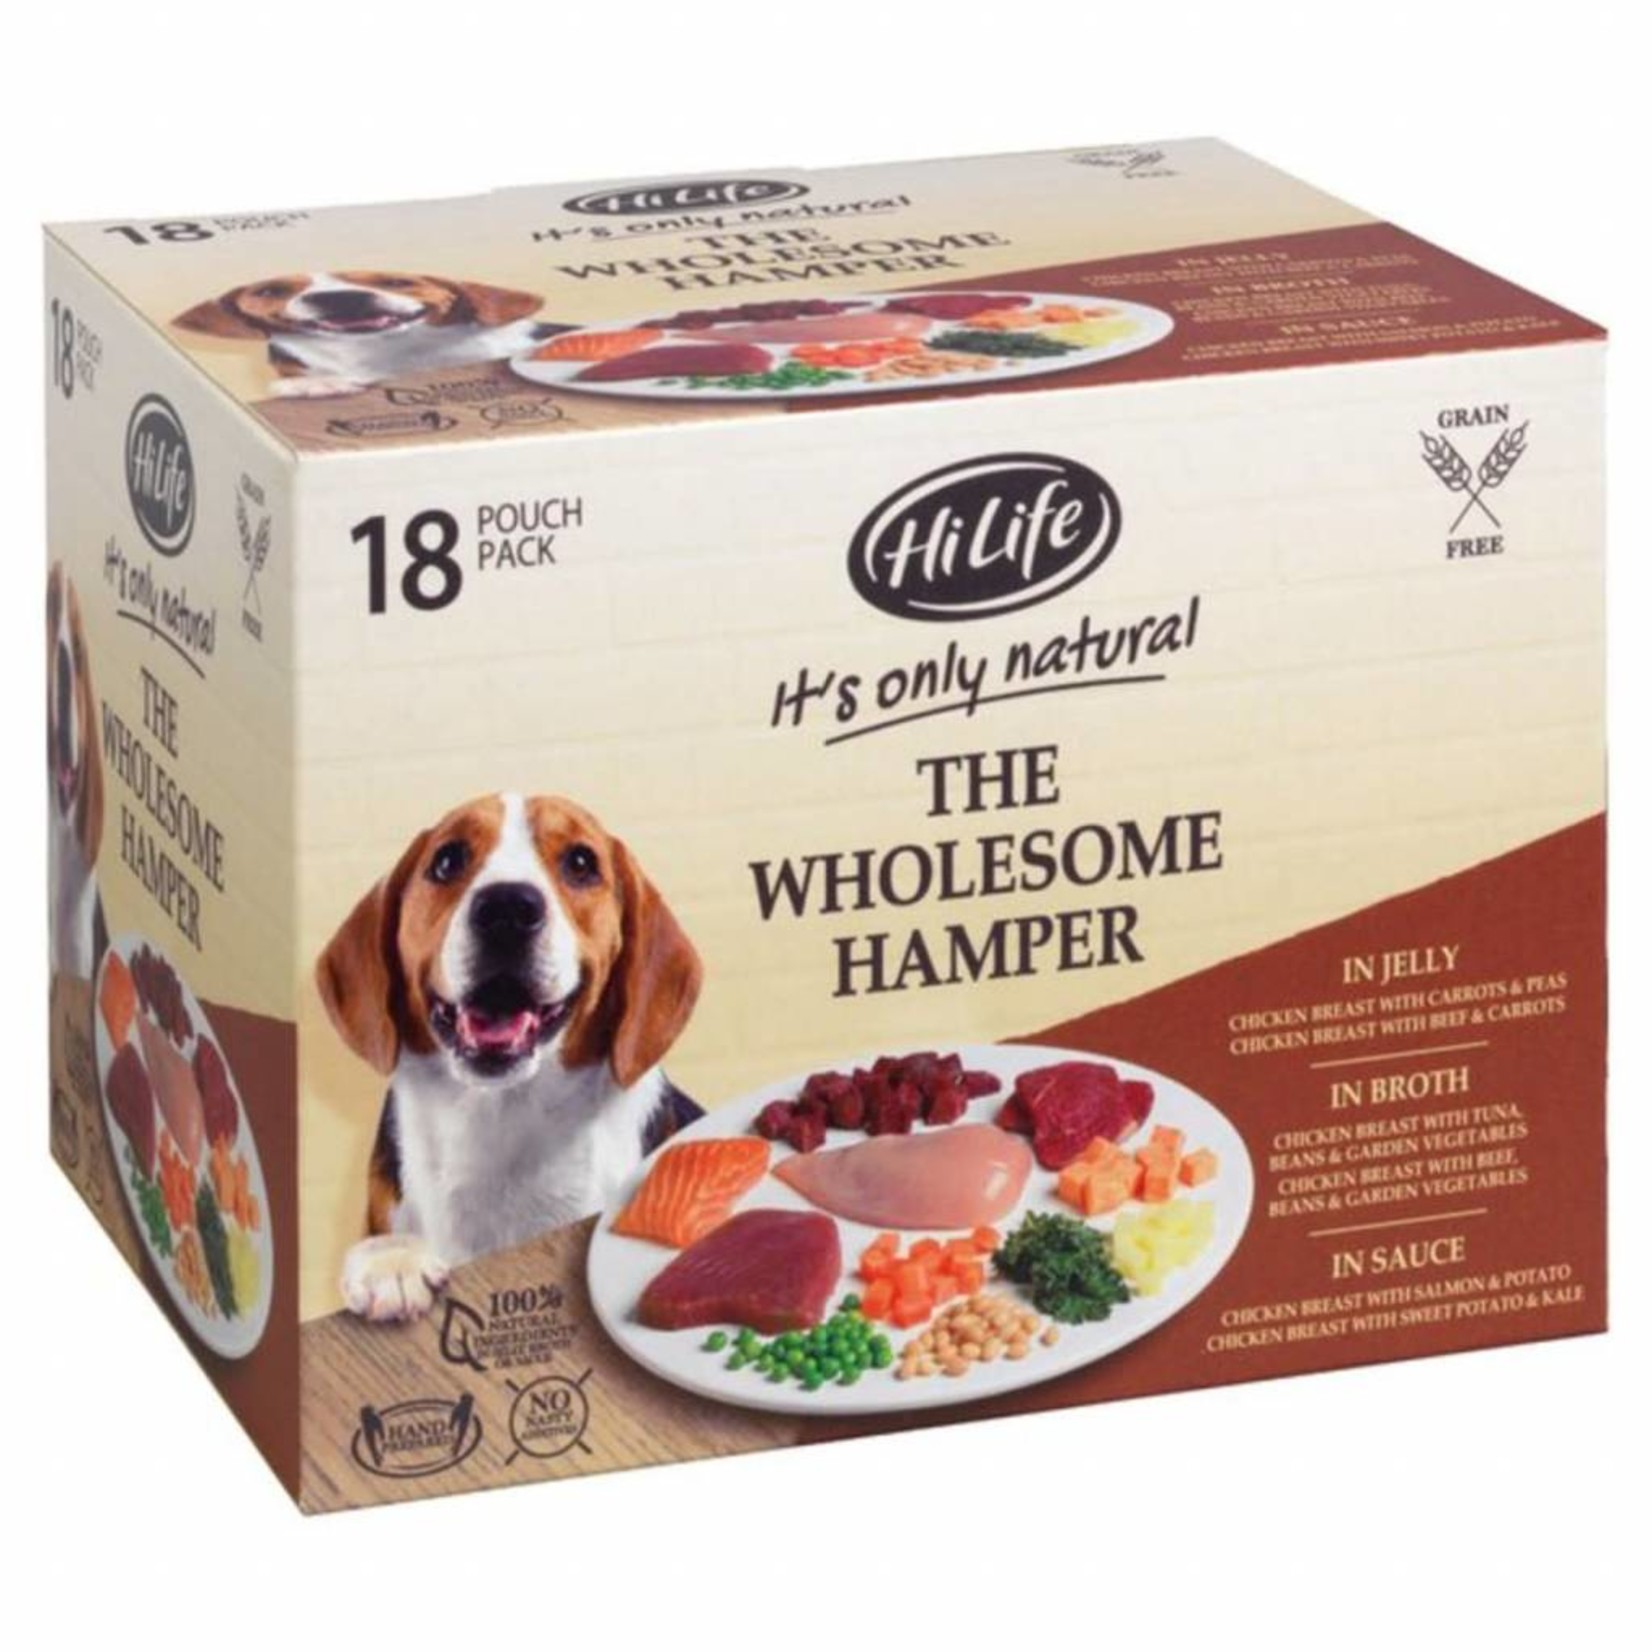 HiLife It's Only Natural The Wholesome Hamper Wet Dog Food Pouch, 18 x 100g